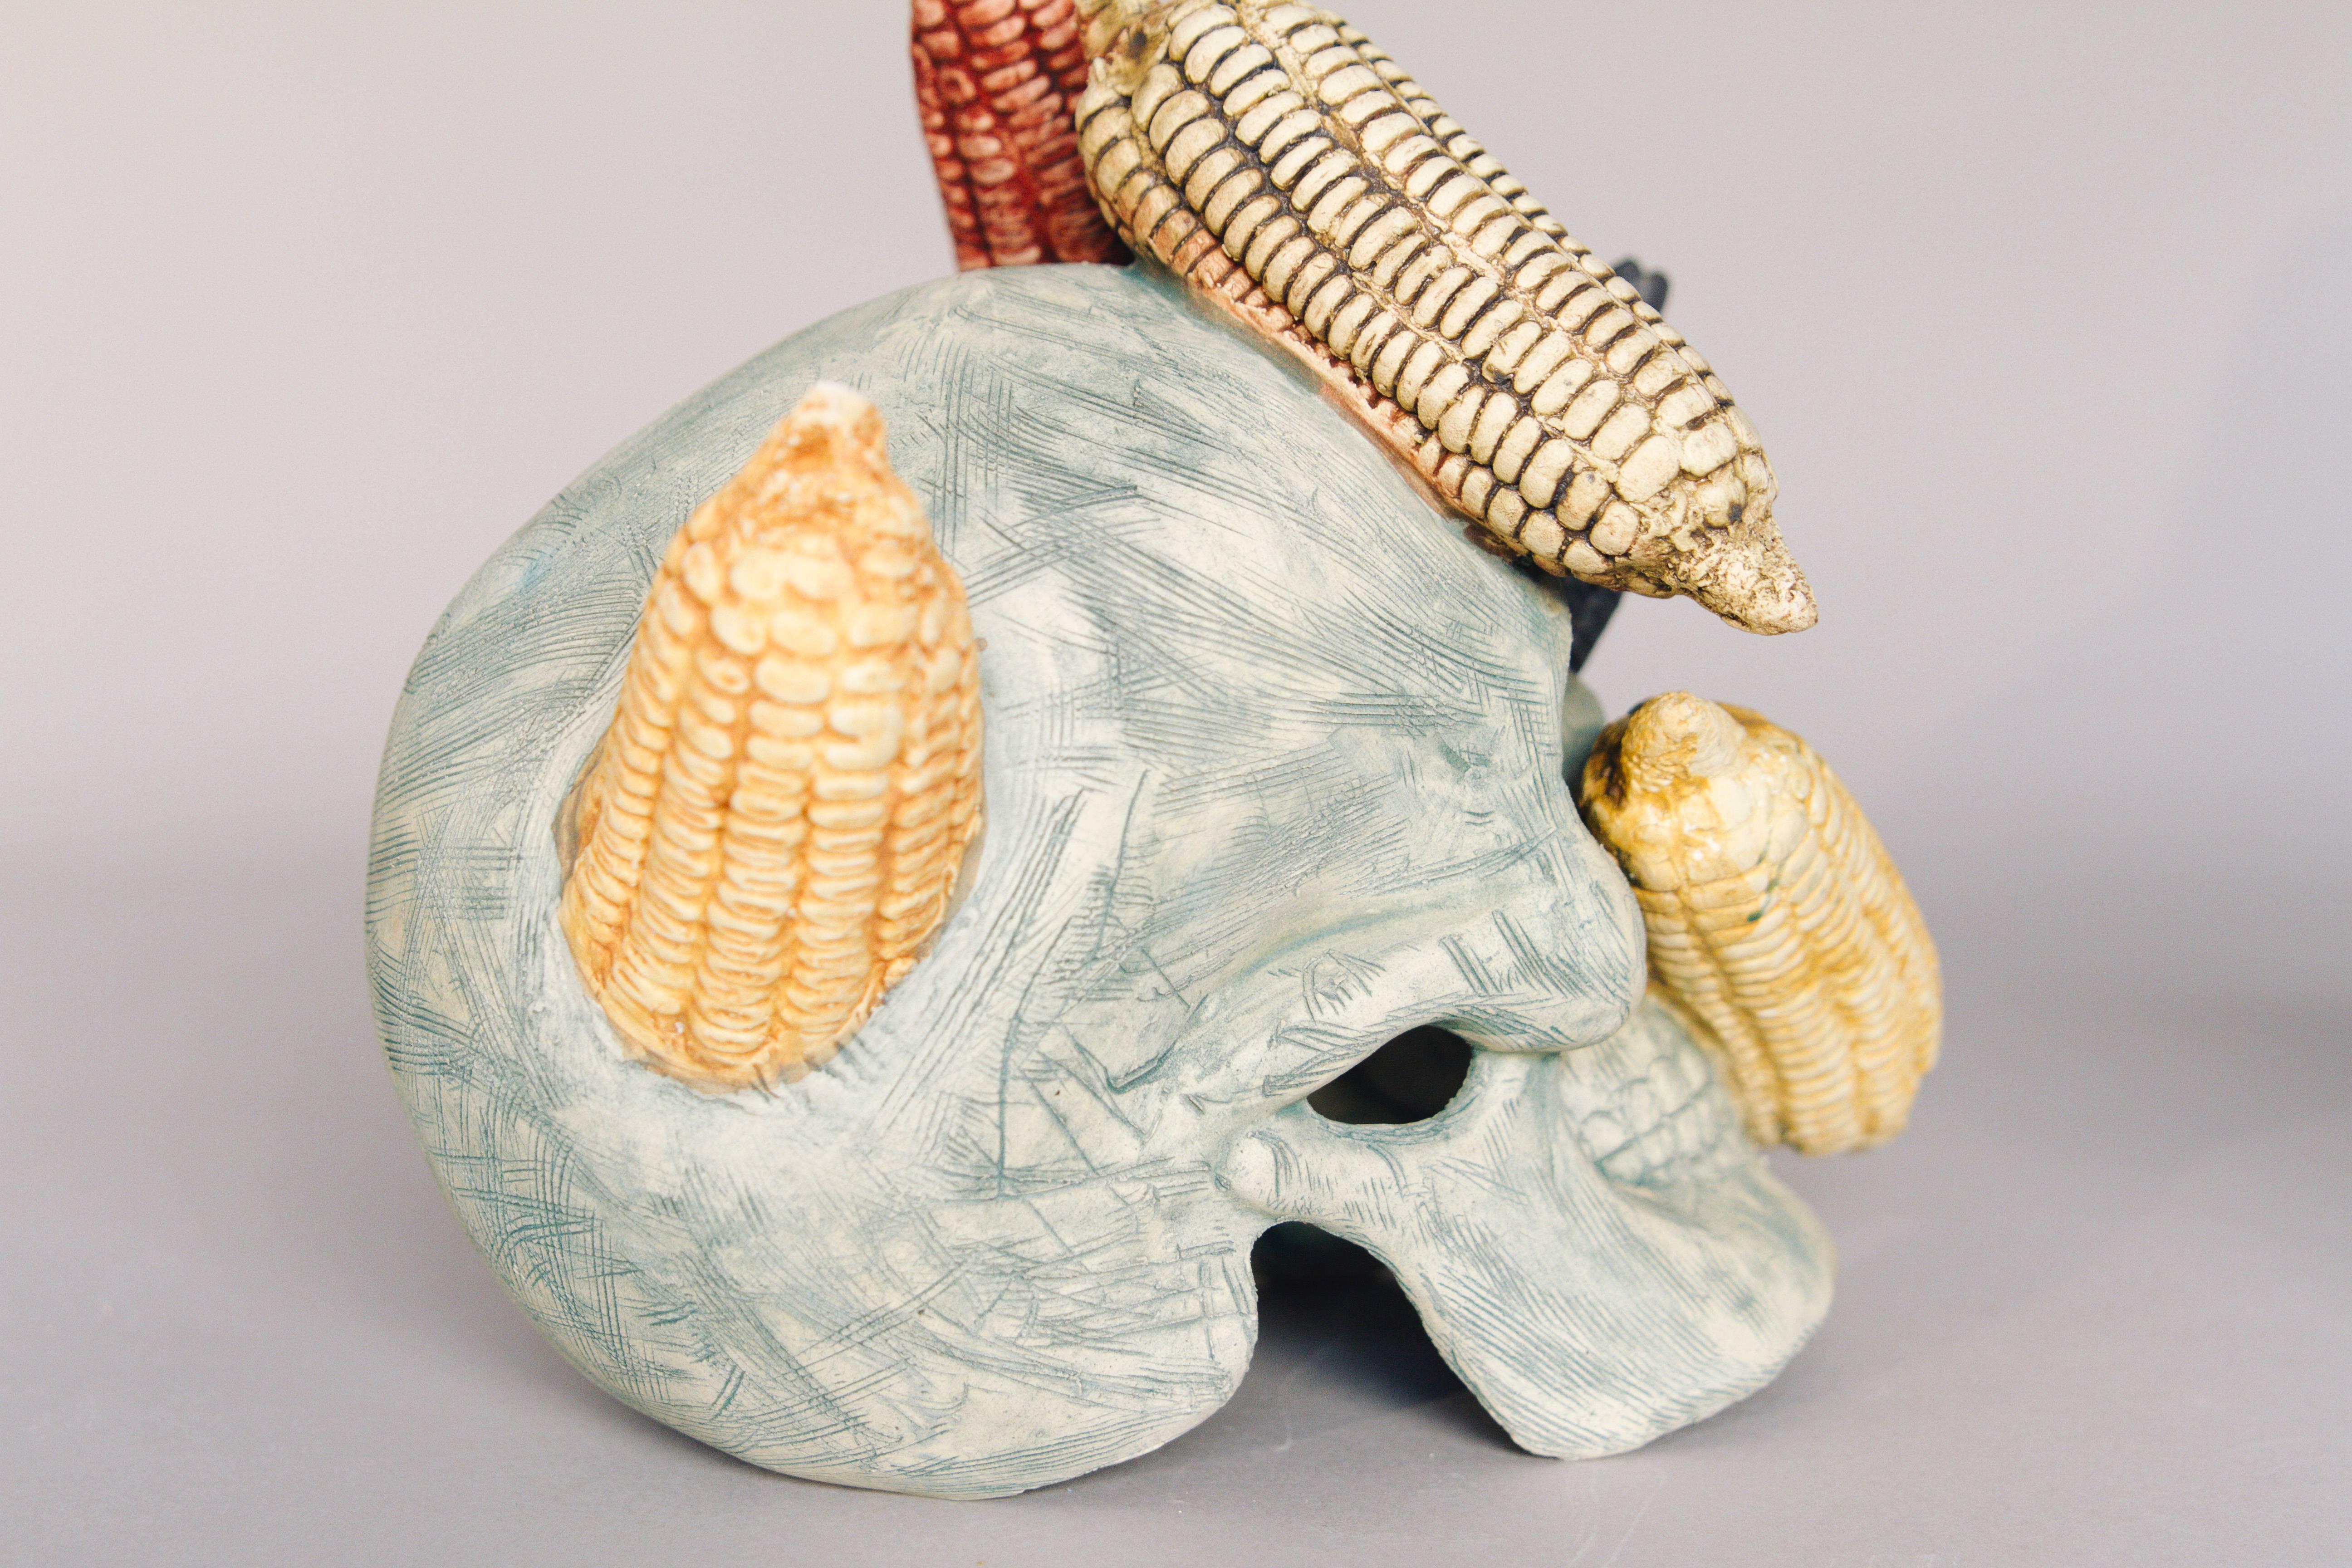 Hand-Crafted Mexican Ceramic Corn Skull Sculpture Hand Crafted Folk Art, Edition 1/30 For Sale